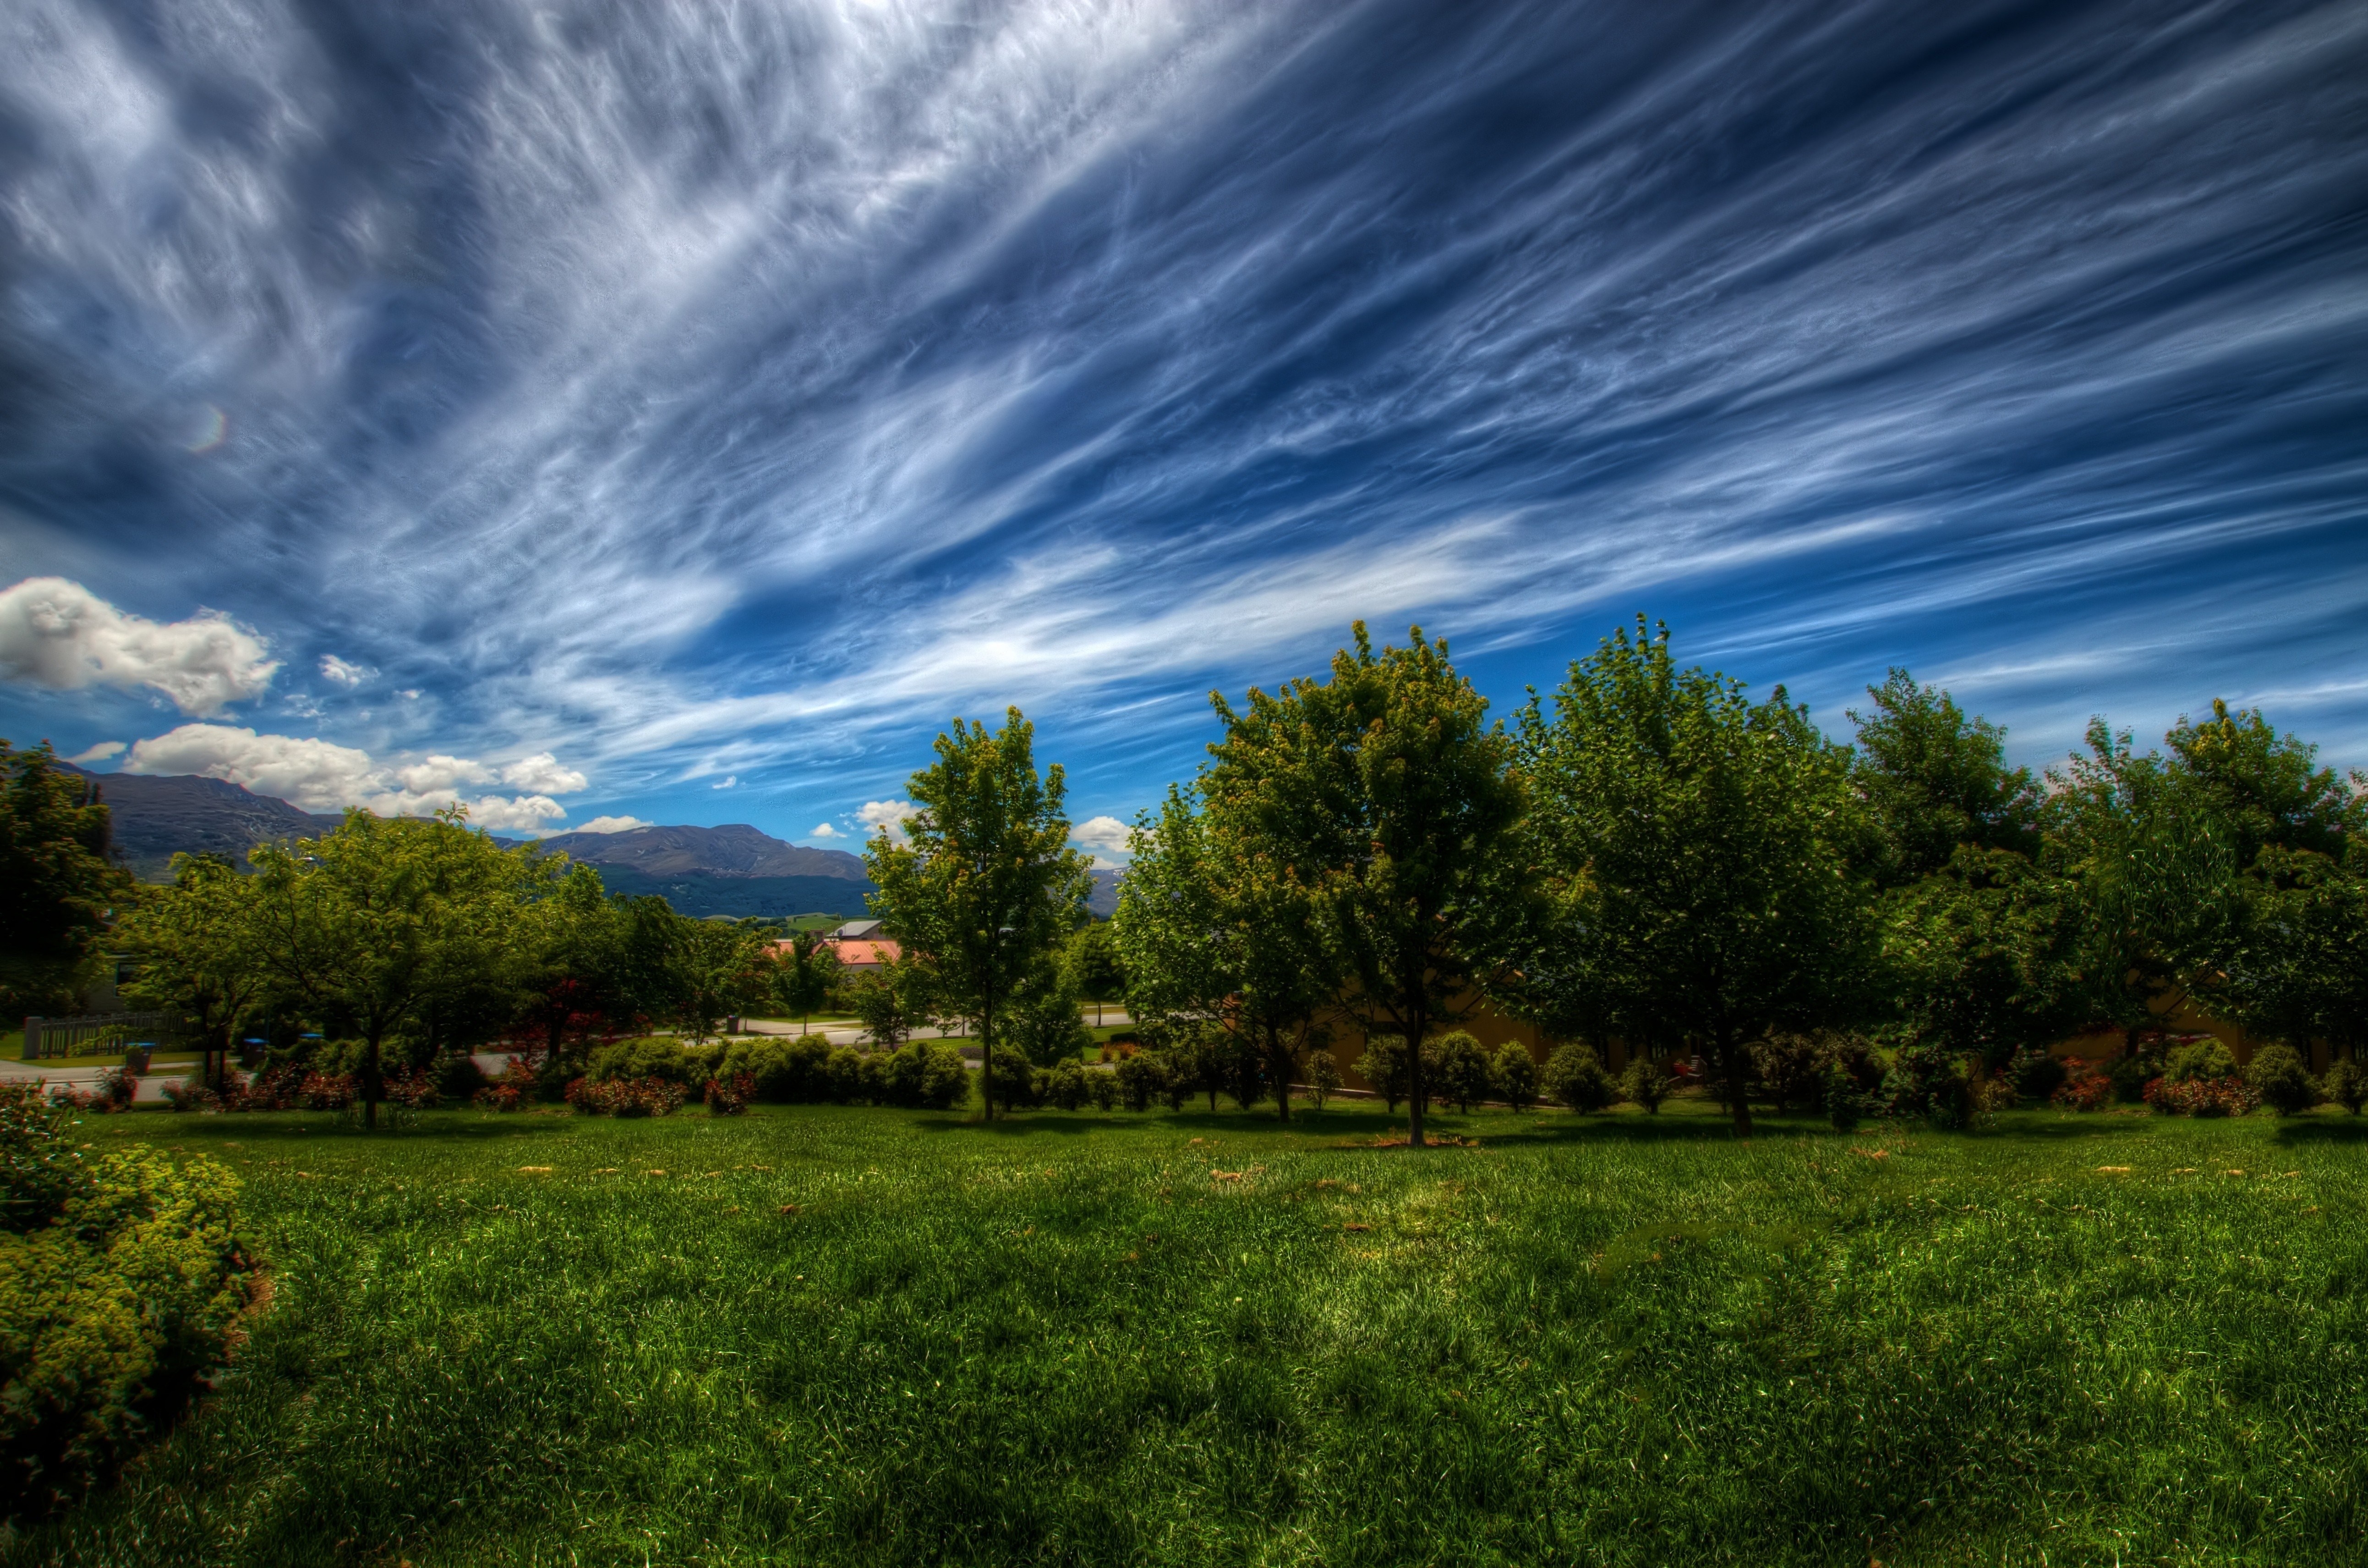 Wallpaper, sky, lines, clouds, trees, grass 5169x3423